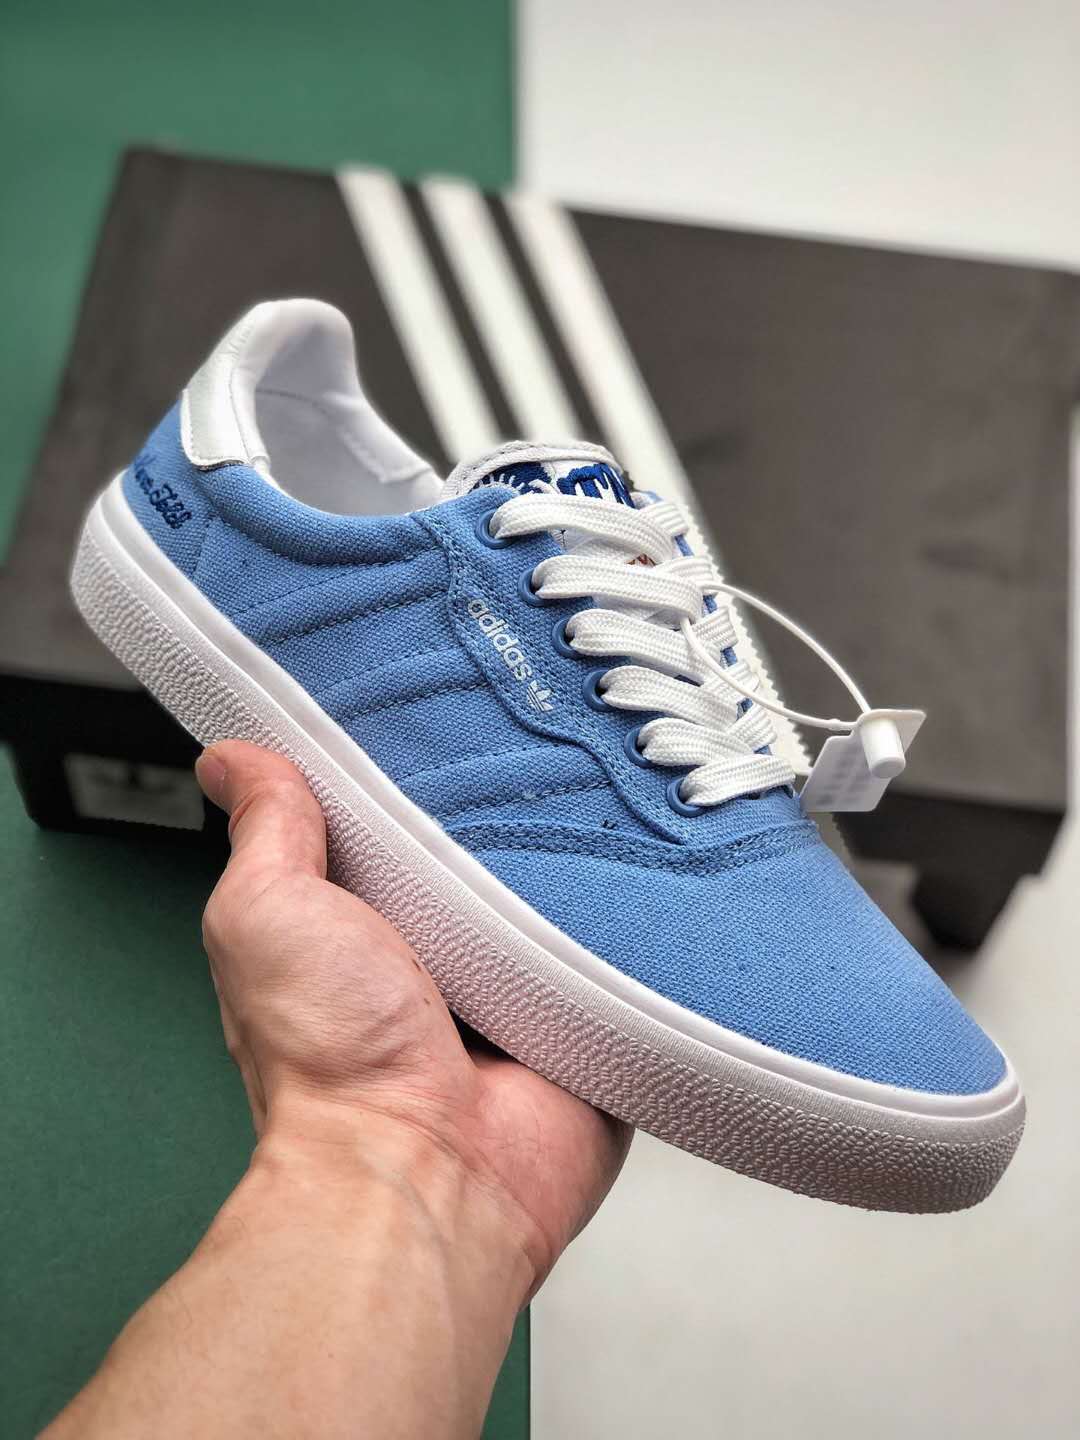 Adidas Truth Never Told x 3MC 'Light Blue' G28190 - Exclusive Style for Sporty Fashion